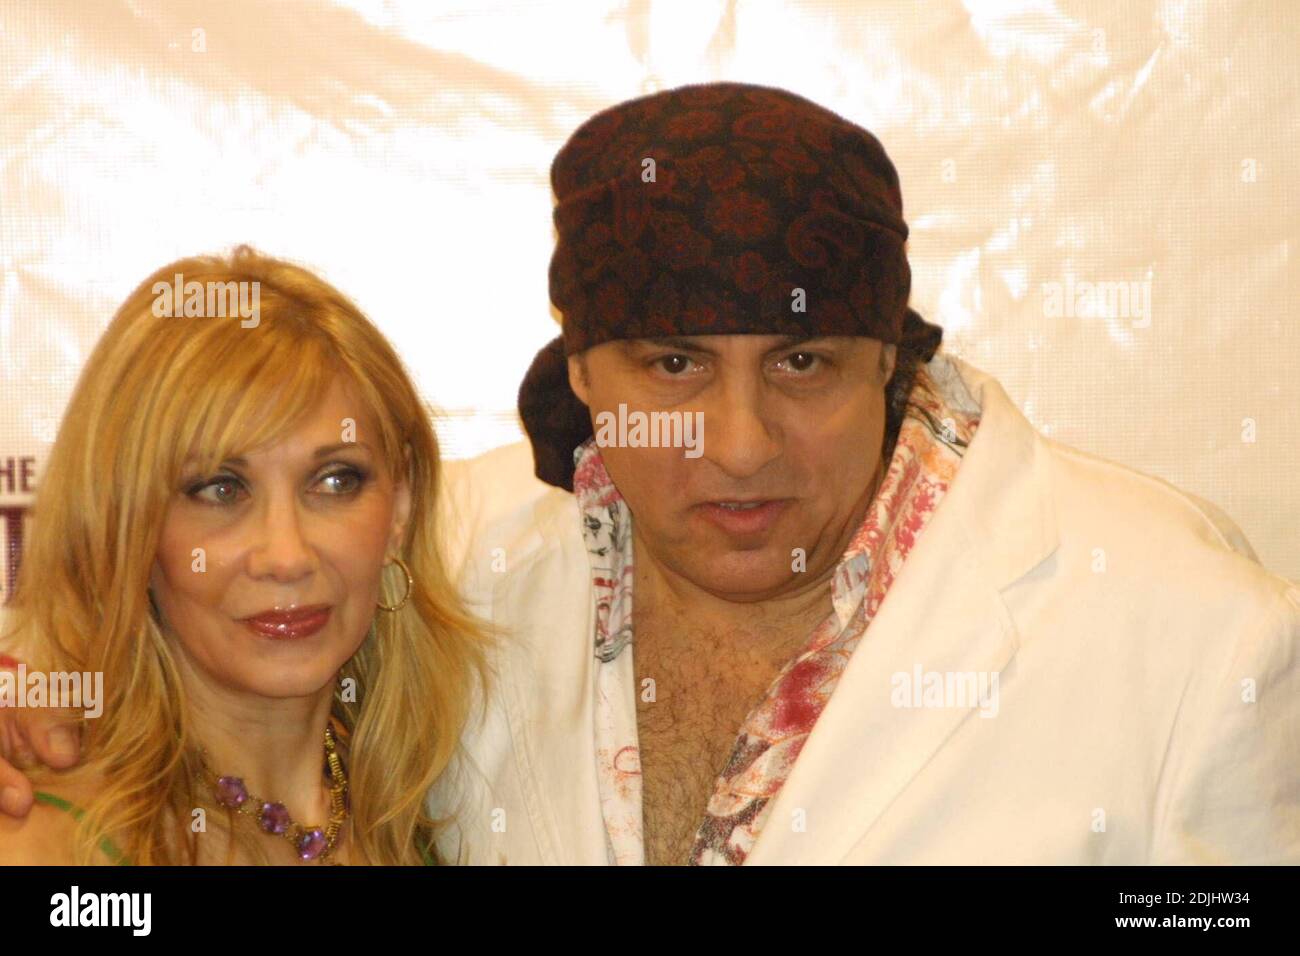 Maureen Van Zandt and Steven Van Zandt at the premiere of 'Love,' a Cirque du Soleil production that celebrates the legacy of The Beatles.  The Mirage, Las Vegas, NV, 06/30/06 Stock Photo